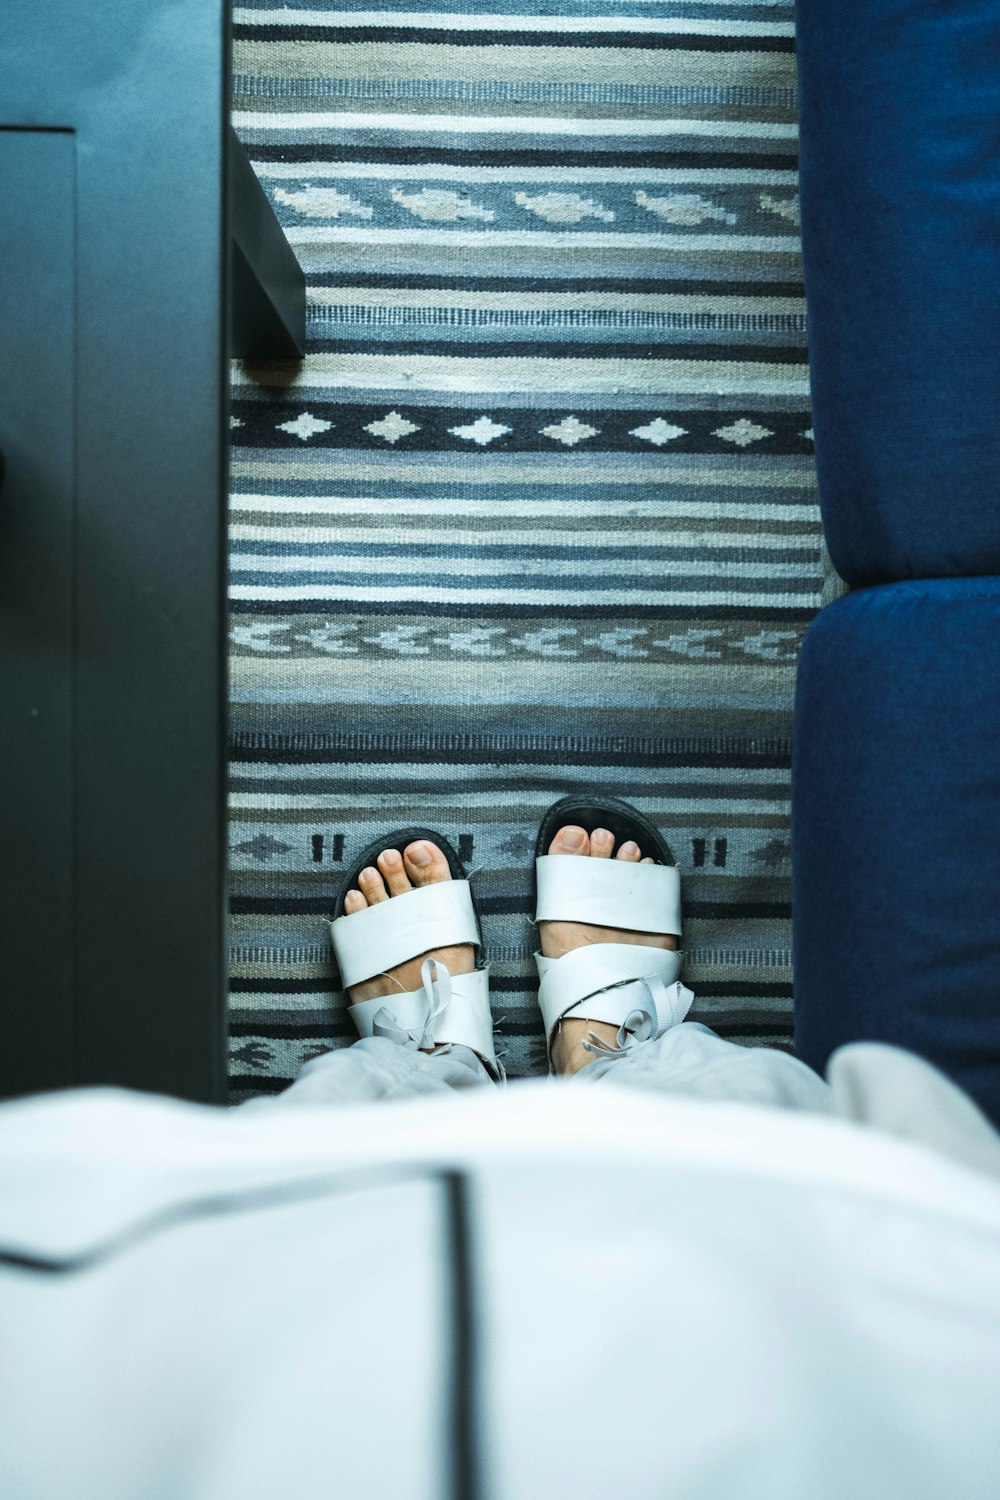 a person's feet in sandals on a bed